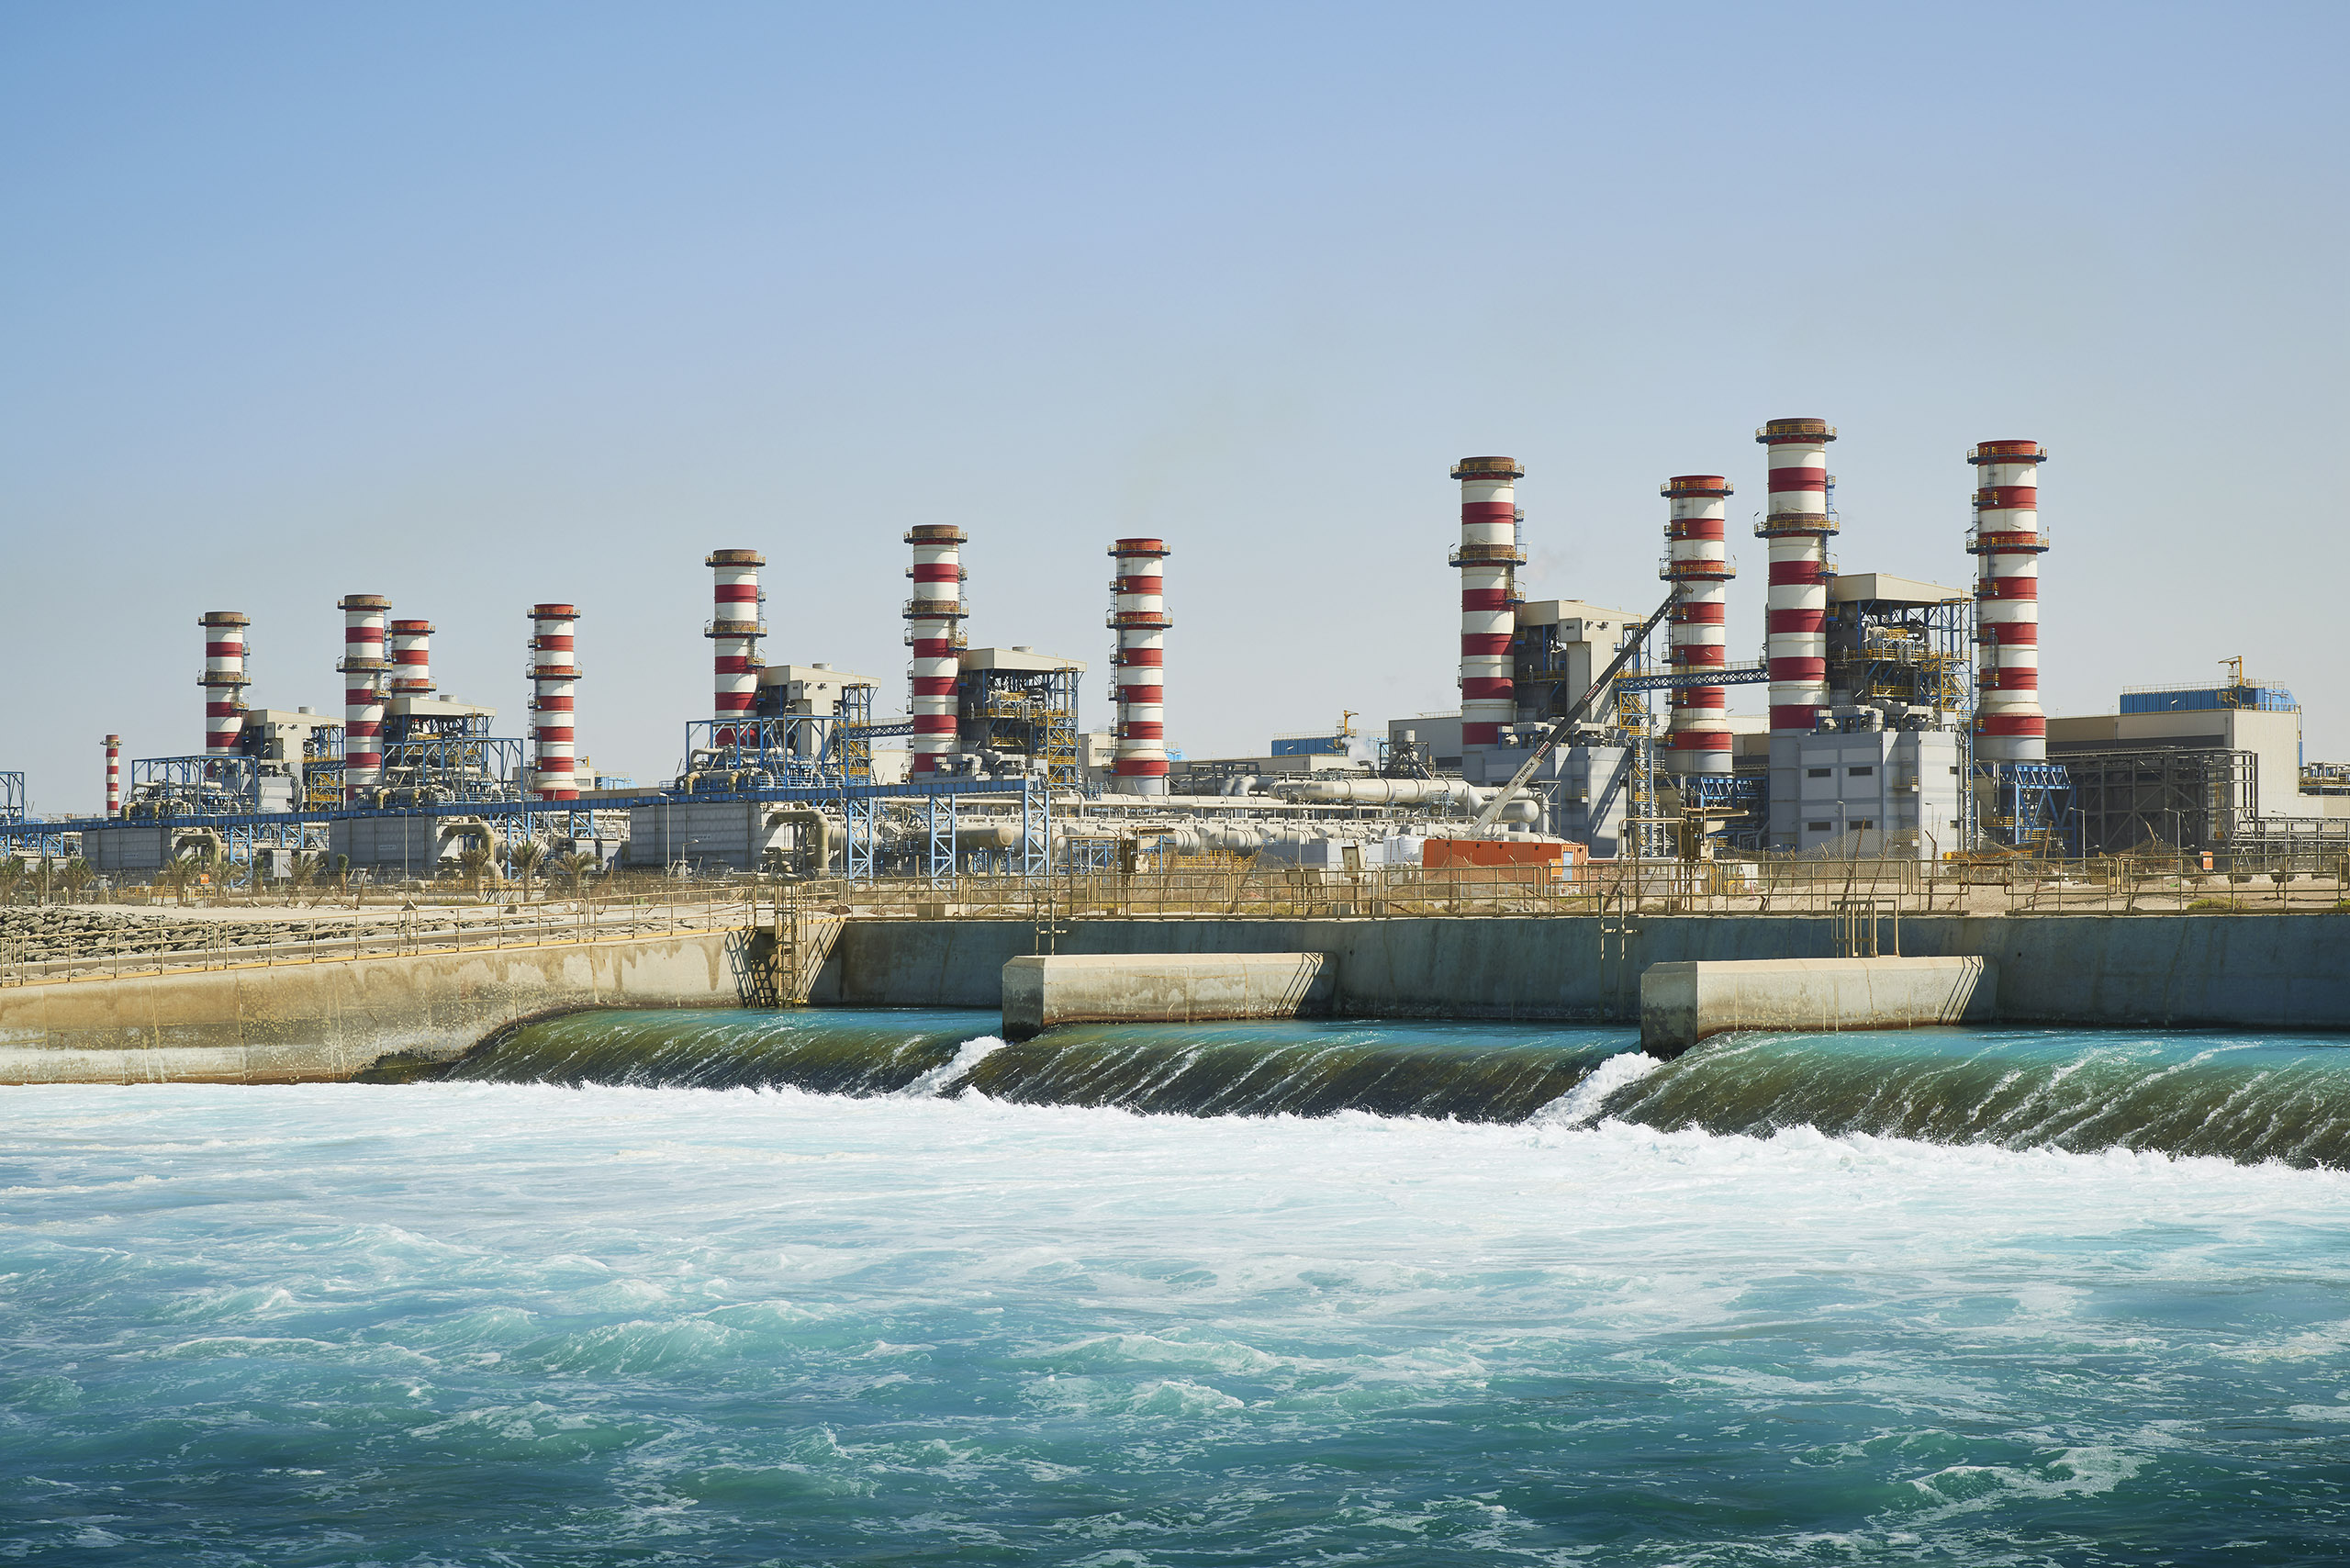 The Jebel Ali plant in the United Arab Emirates is the world’s biggest ­desalination facility (Photographs by Spencer Lowell for TIME)